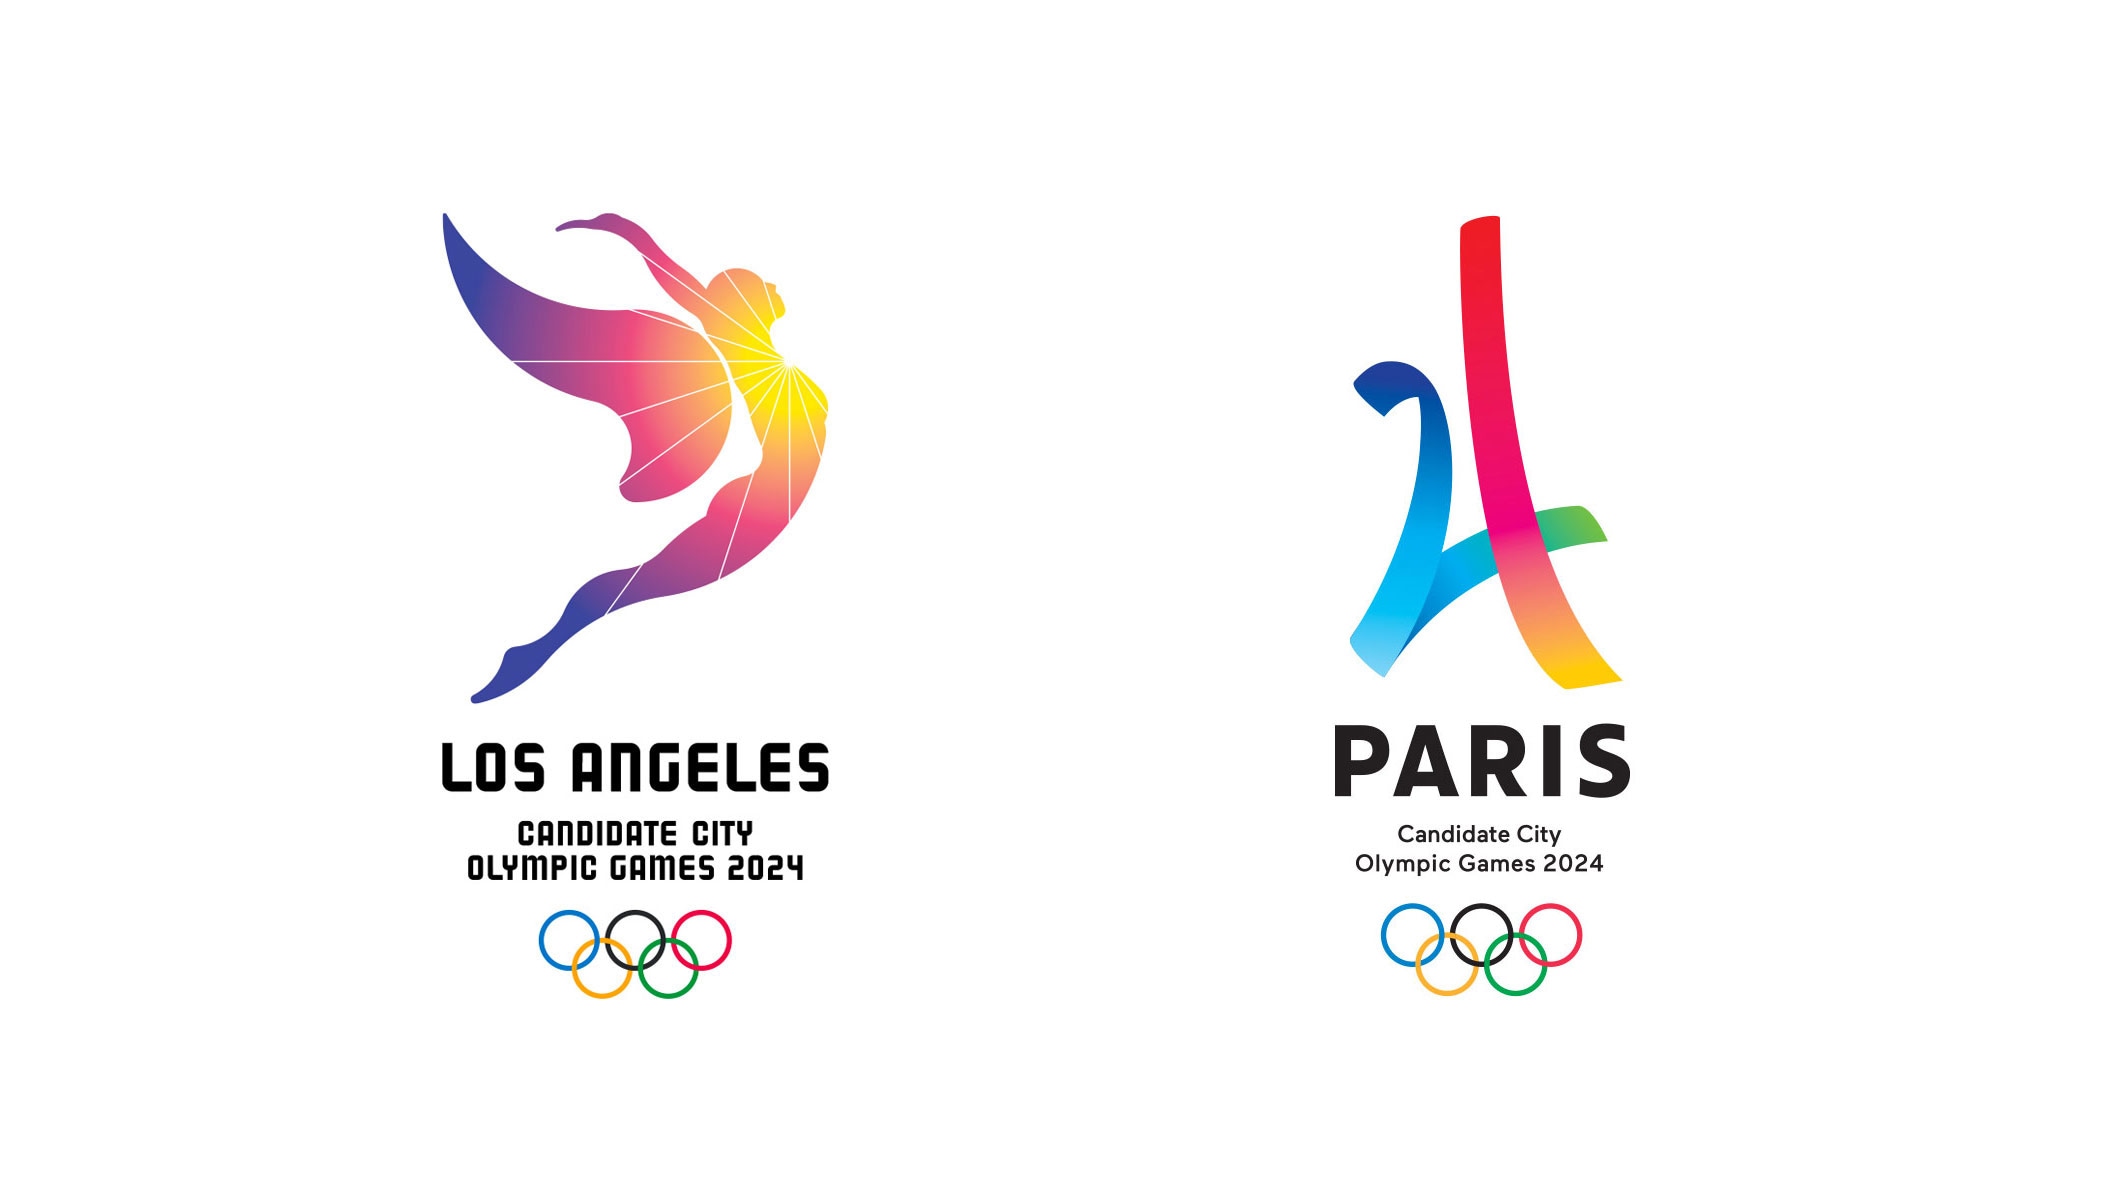 awarding-the-olympic-games-2024-and-2028-is-a-golden-opportunity